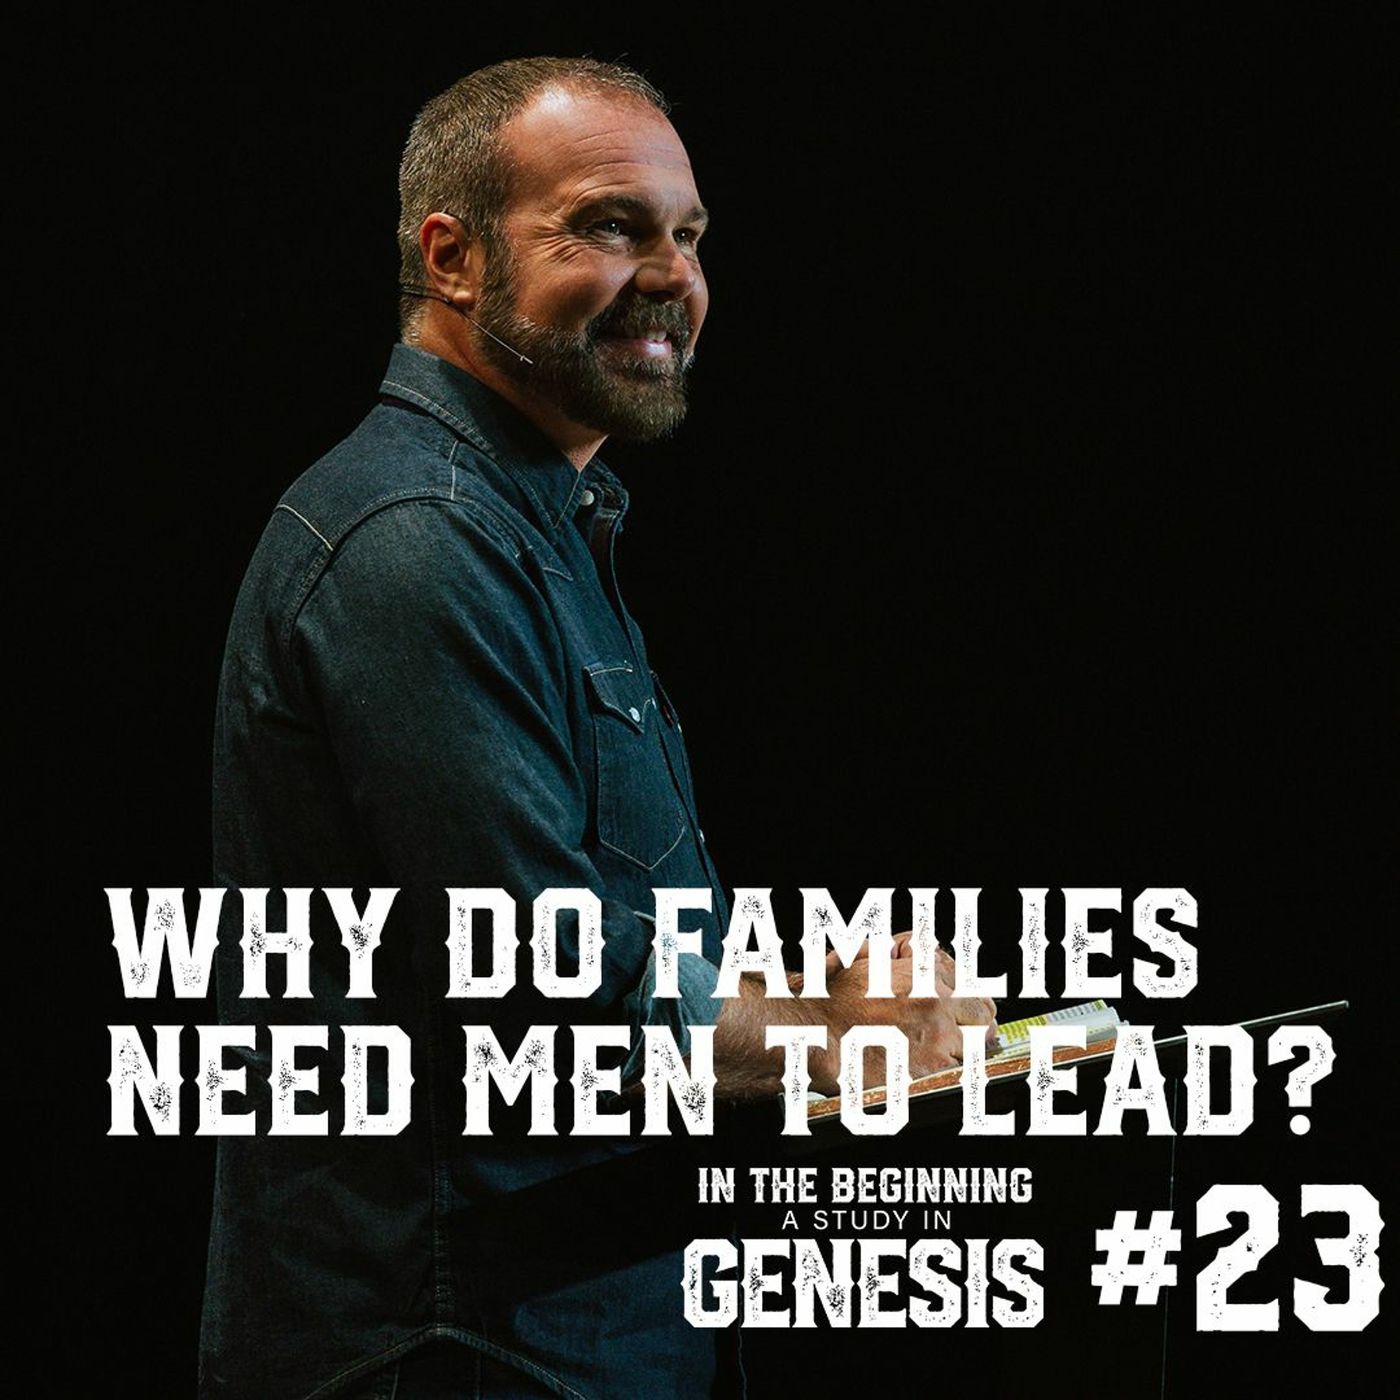 Genesis #23 - Why Do Families Need Men To Lead?